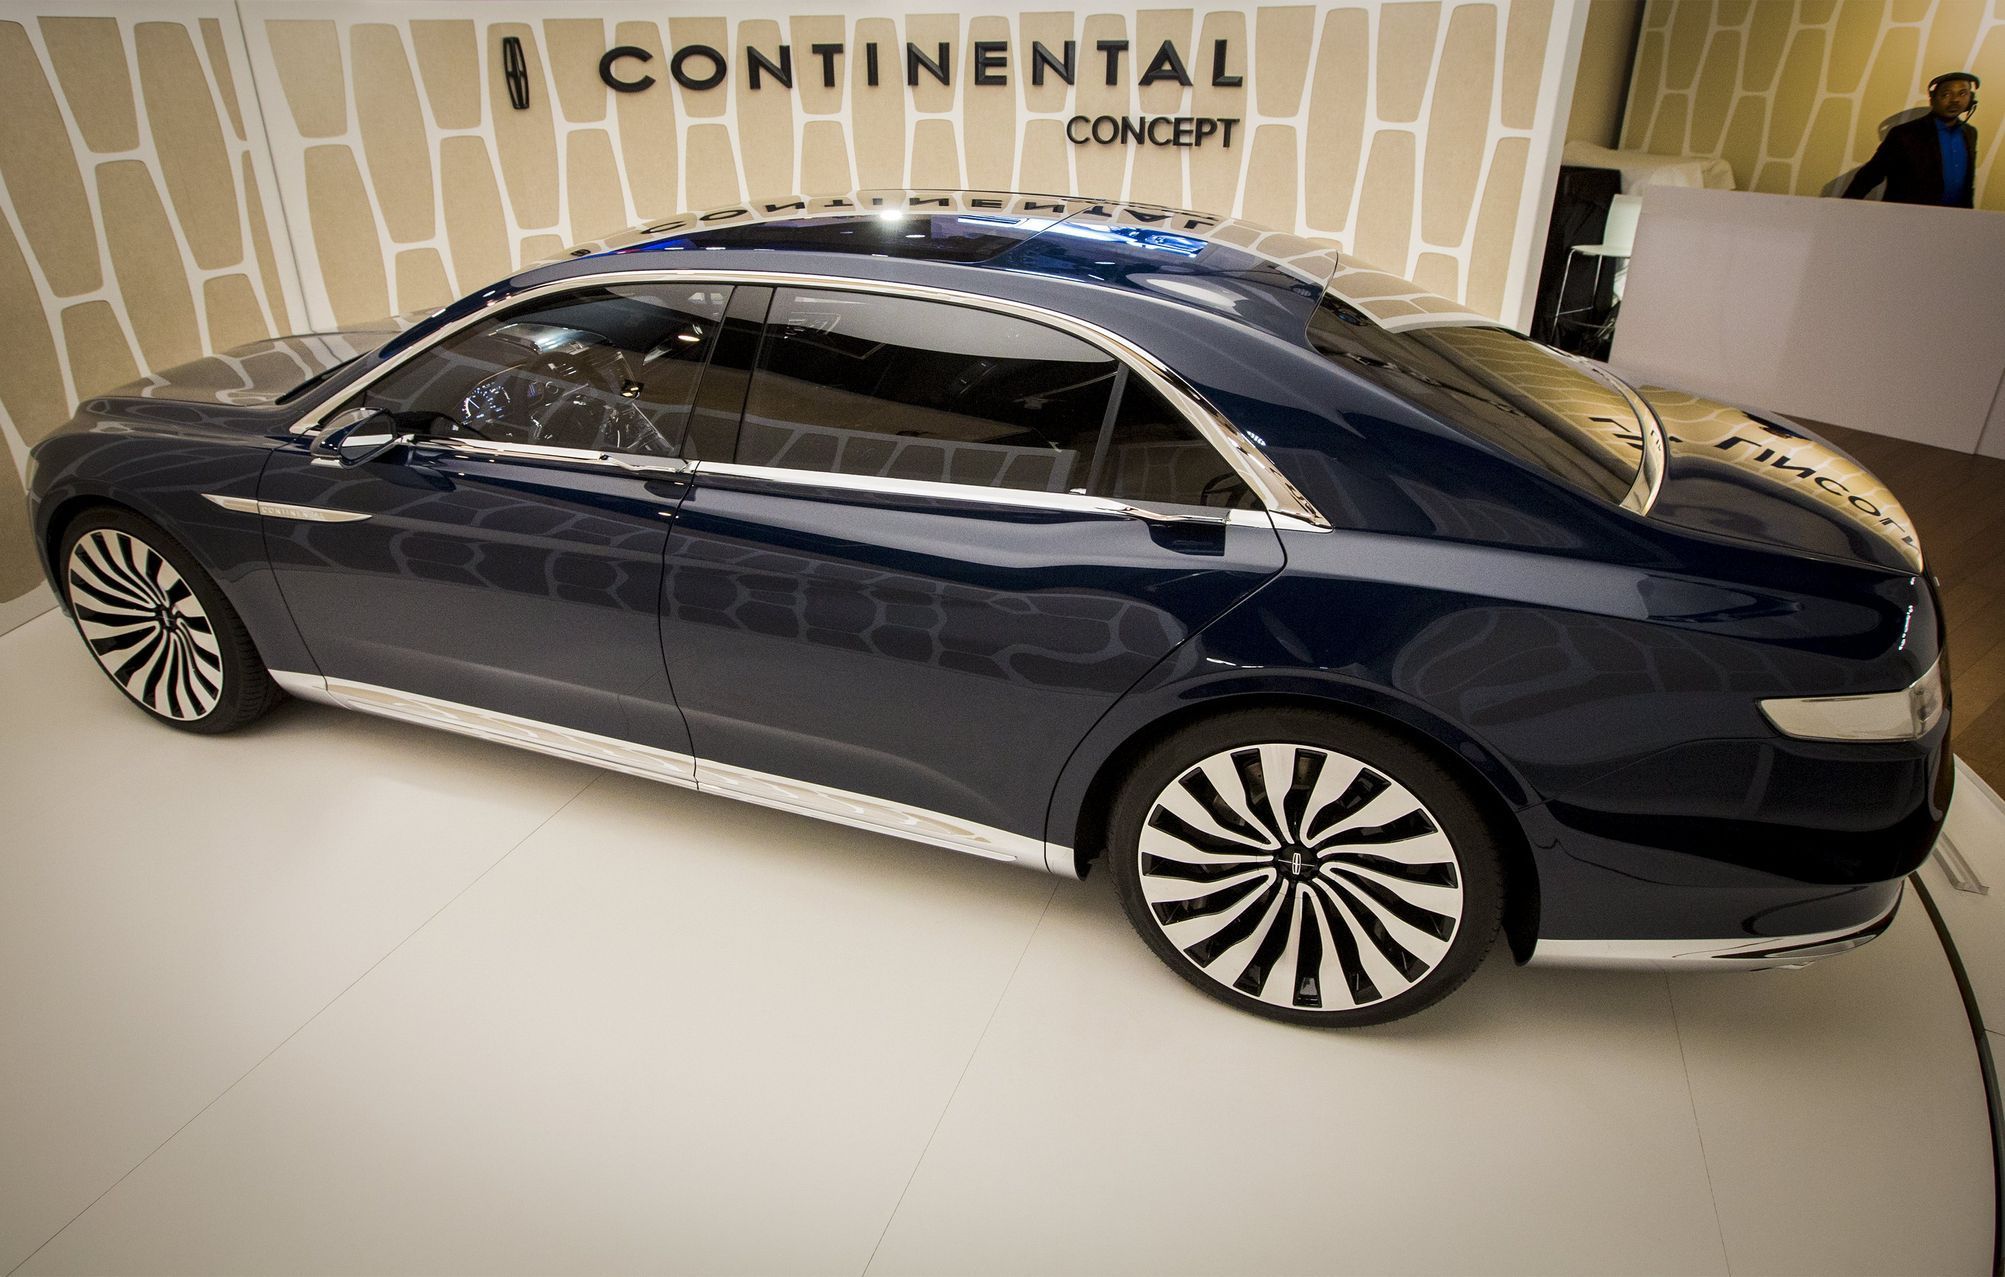 Ford Motor Co. unveils the Lincoln Continental concept car at an event ahead of the New York International Auto Show in New York